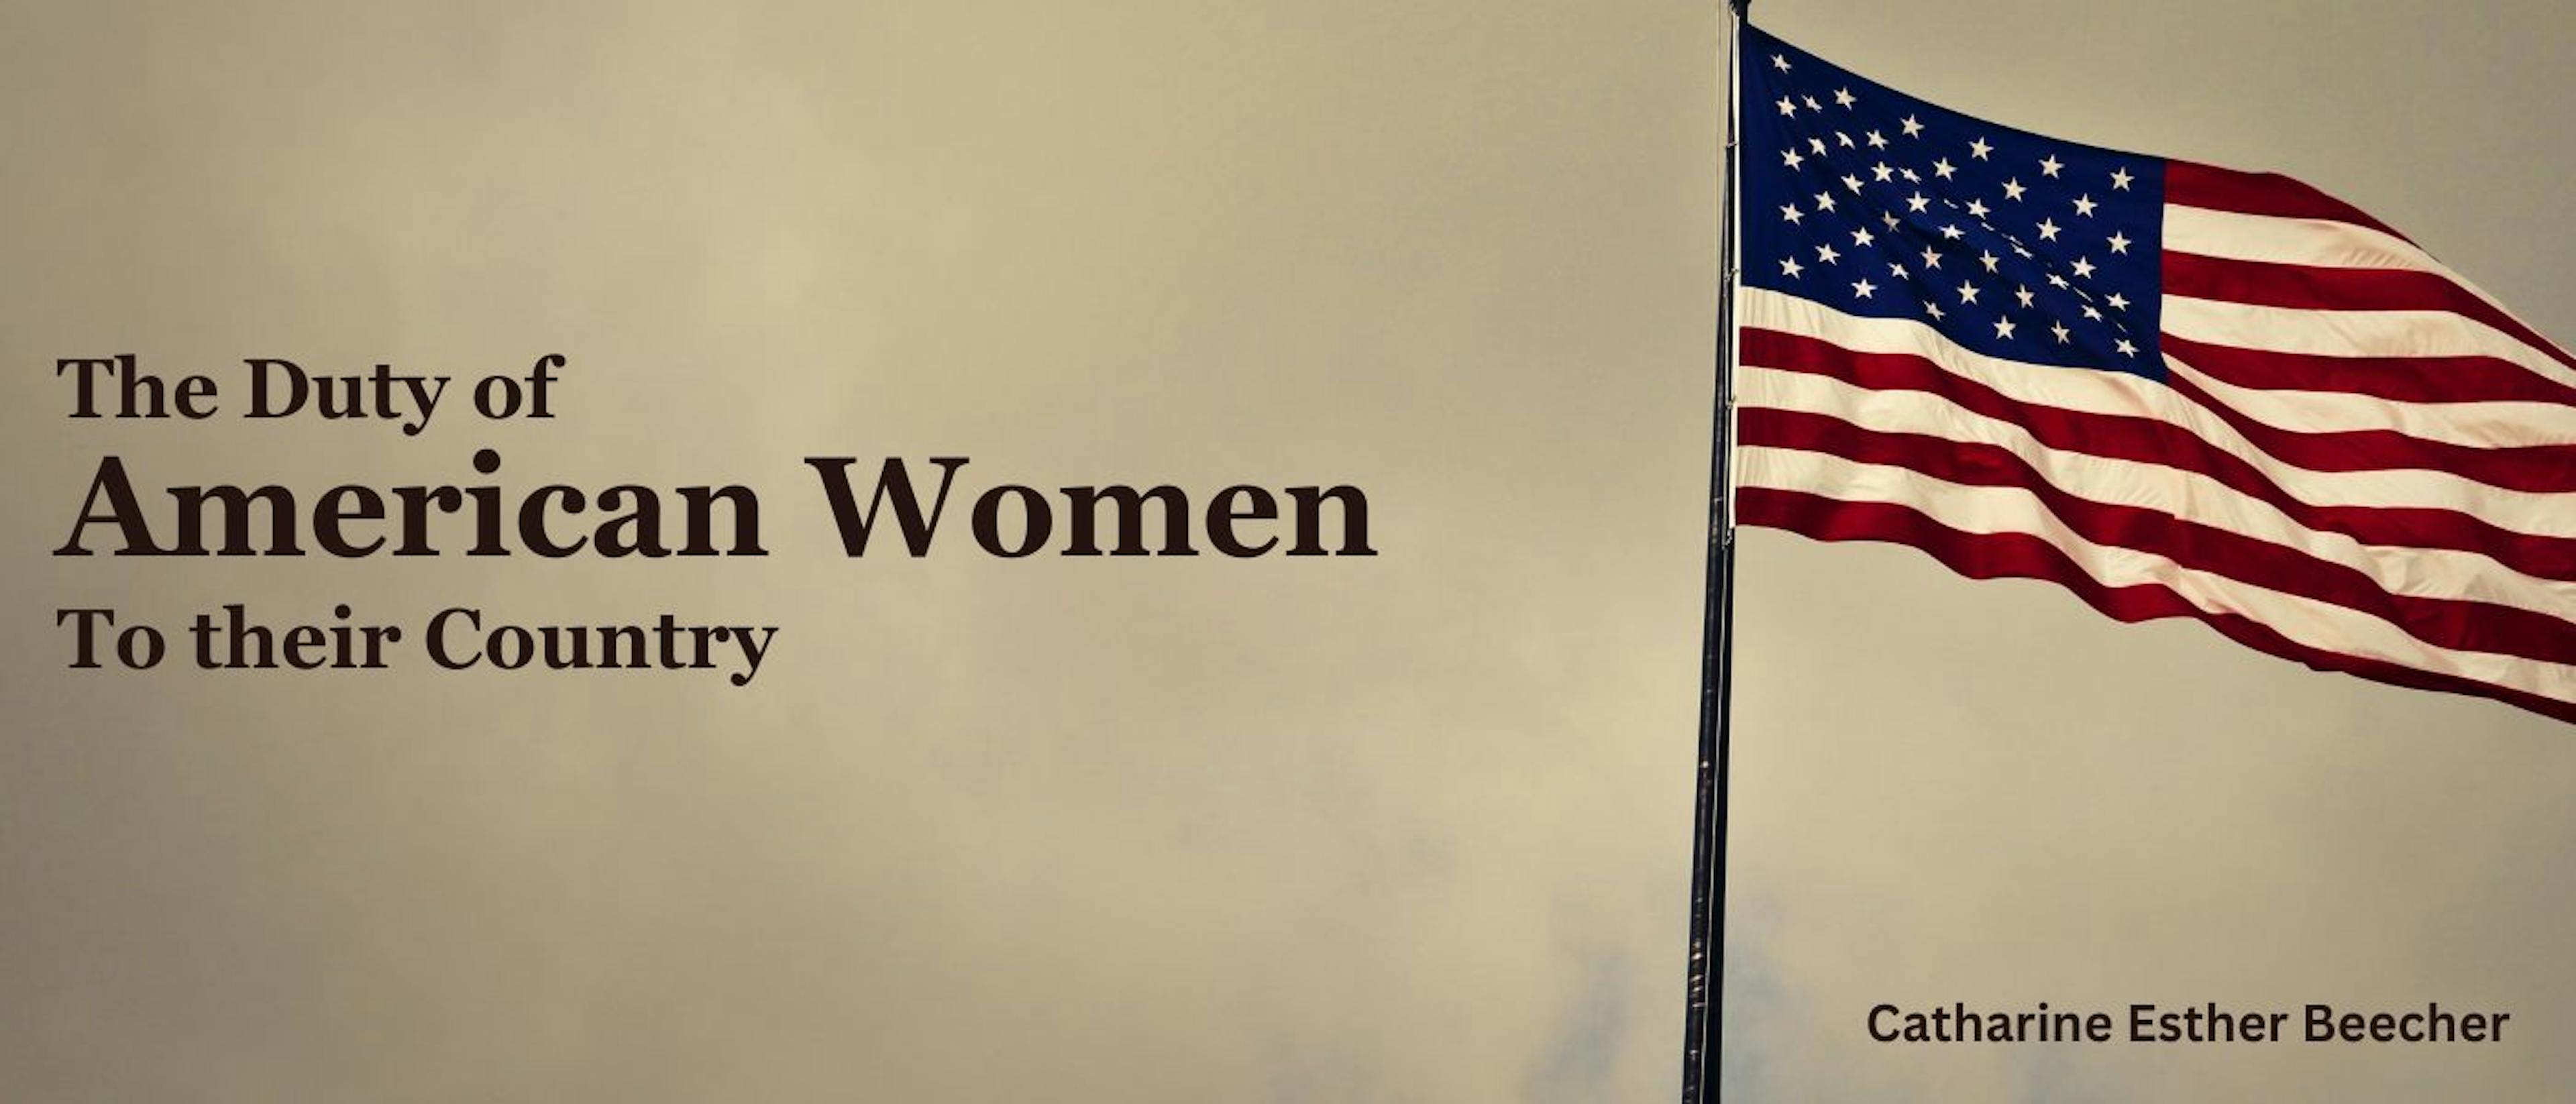 featured image - The Duty of American Women to Their Country by Catharine Esther Beecher - Table of Links